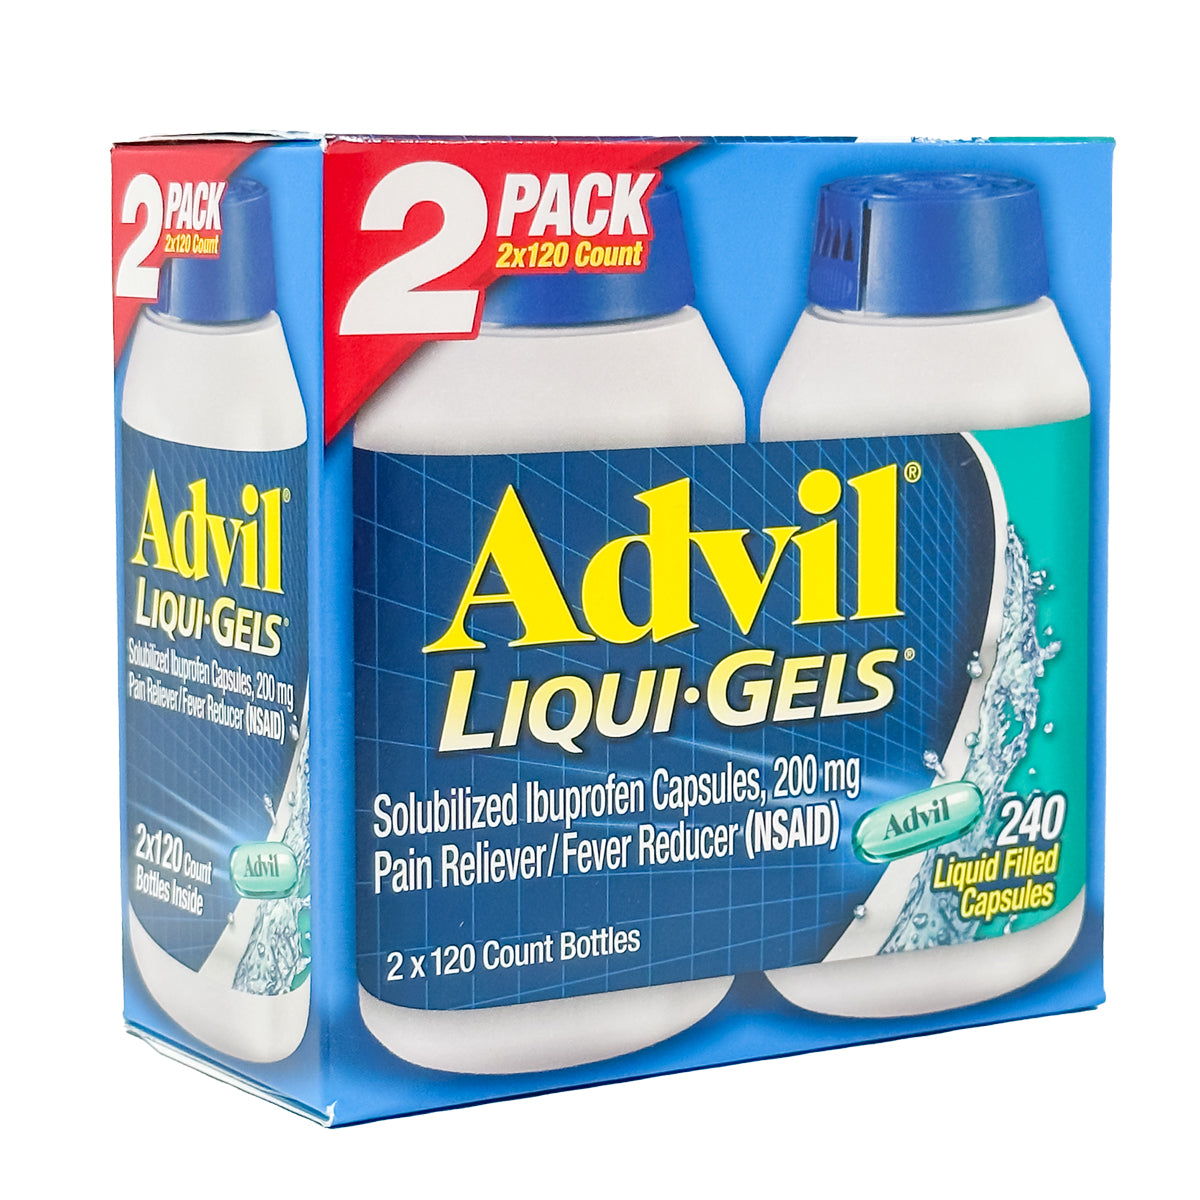 Advil Liqui-Gels Ibuprofen 200 mg. Pain Reliever/Fever Reducer, 120 Capsules each (Pack of 2)